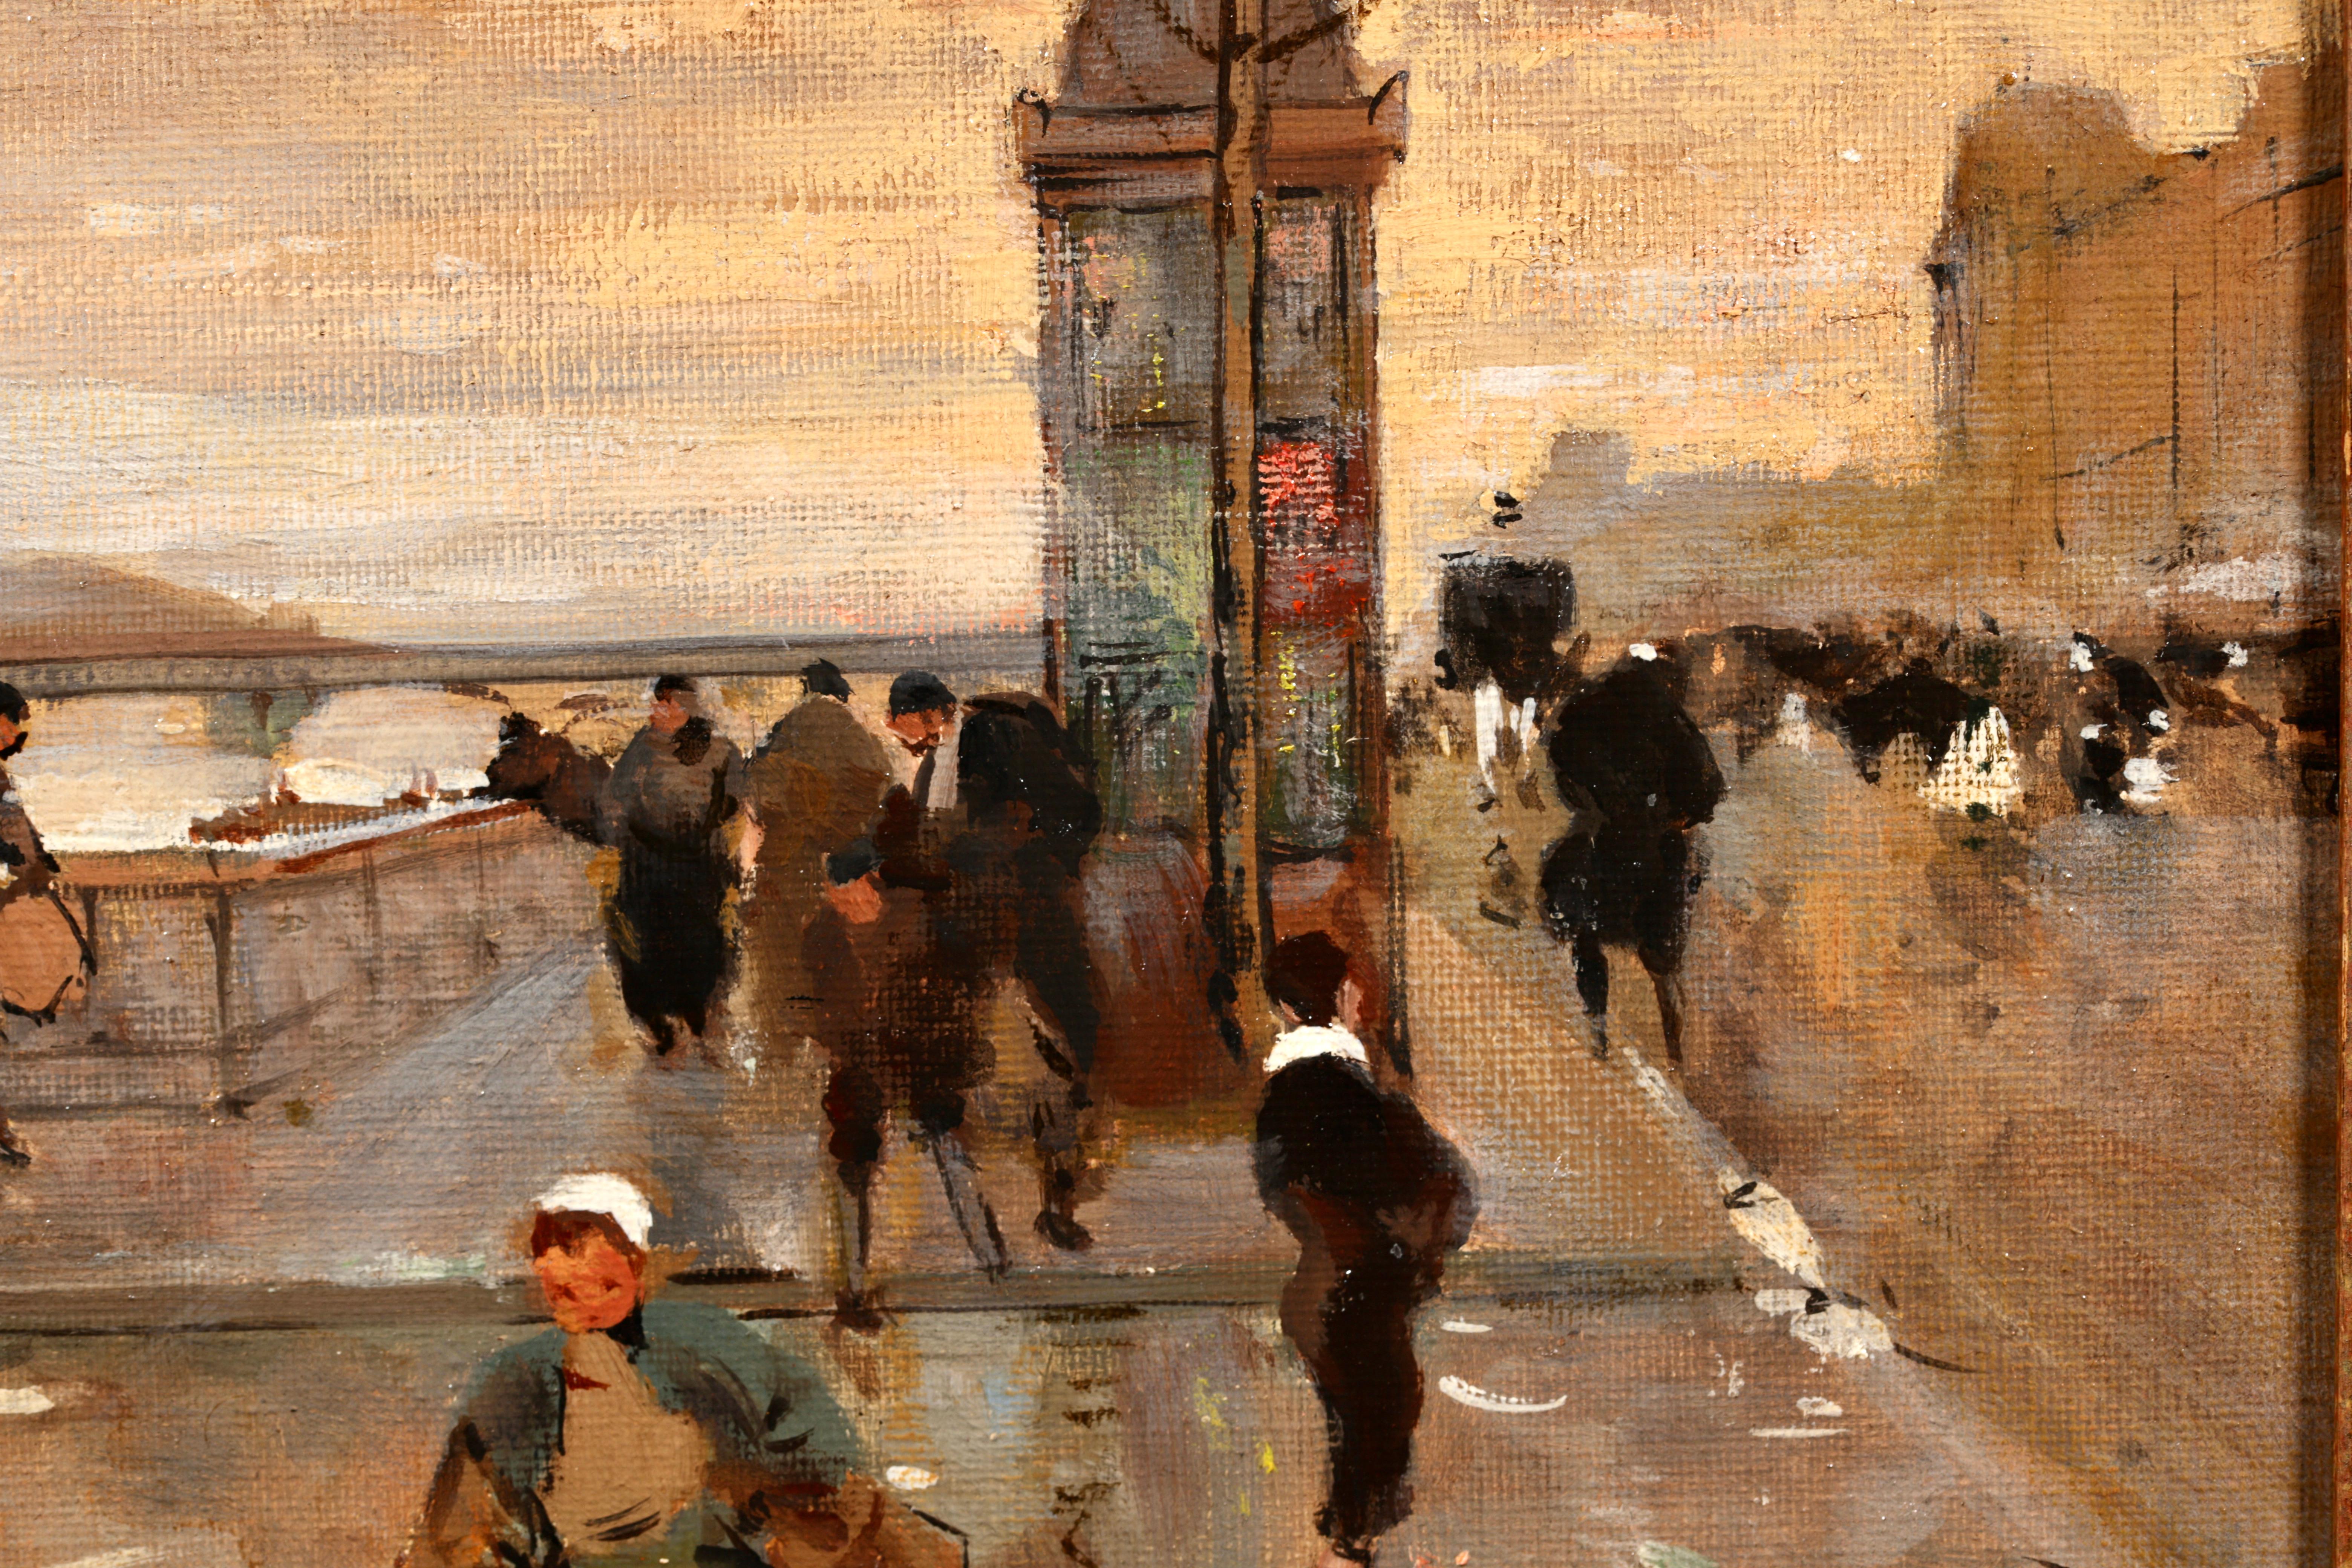 Signed figures in cityscape oil on canvas circa 1890 by French impressionist painter Luigi Loir. The piece depicts people at the Quai d'Orsay, situated on the left bank of the River Seine in Paris, France on what looks to be a cold winter day in the